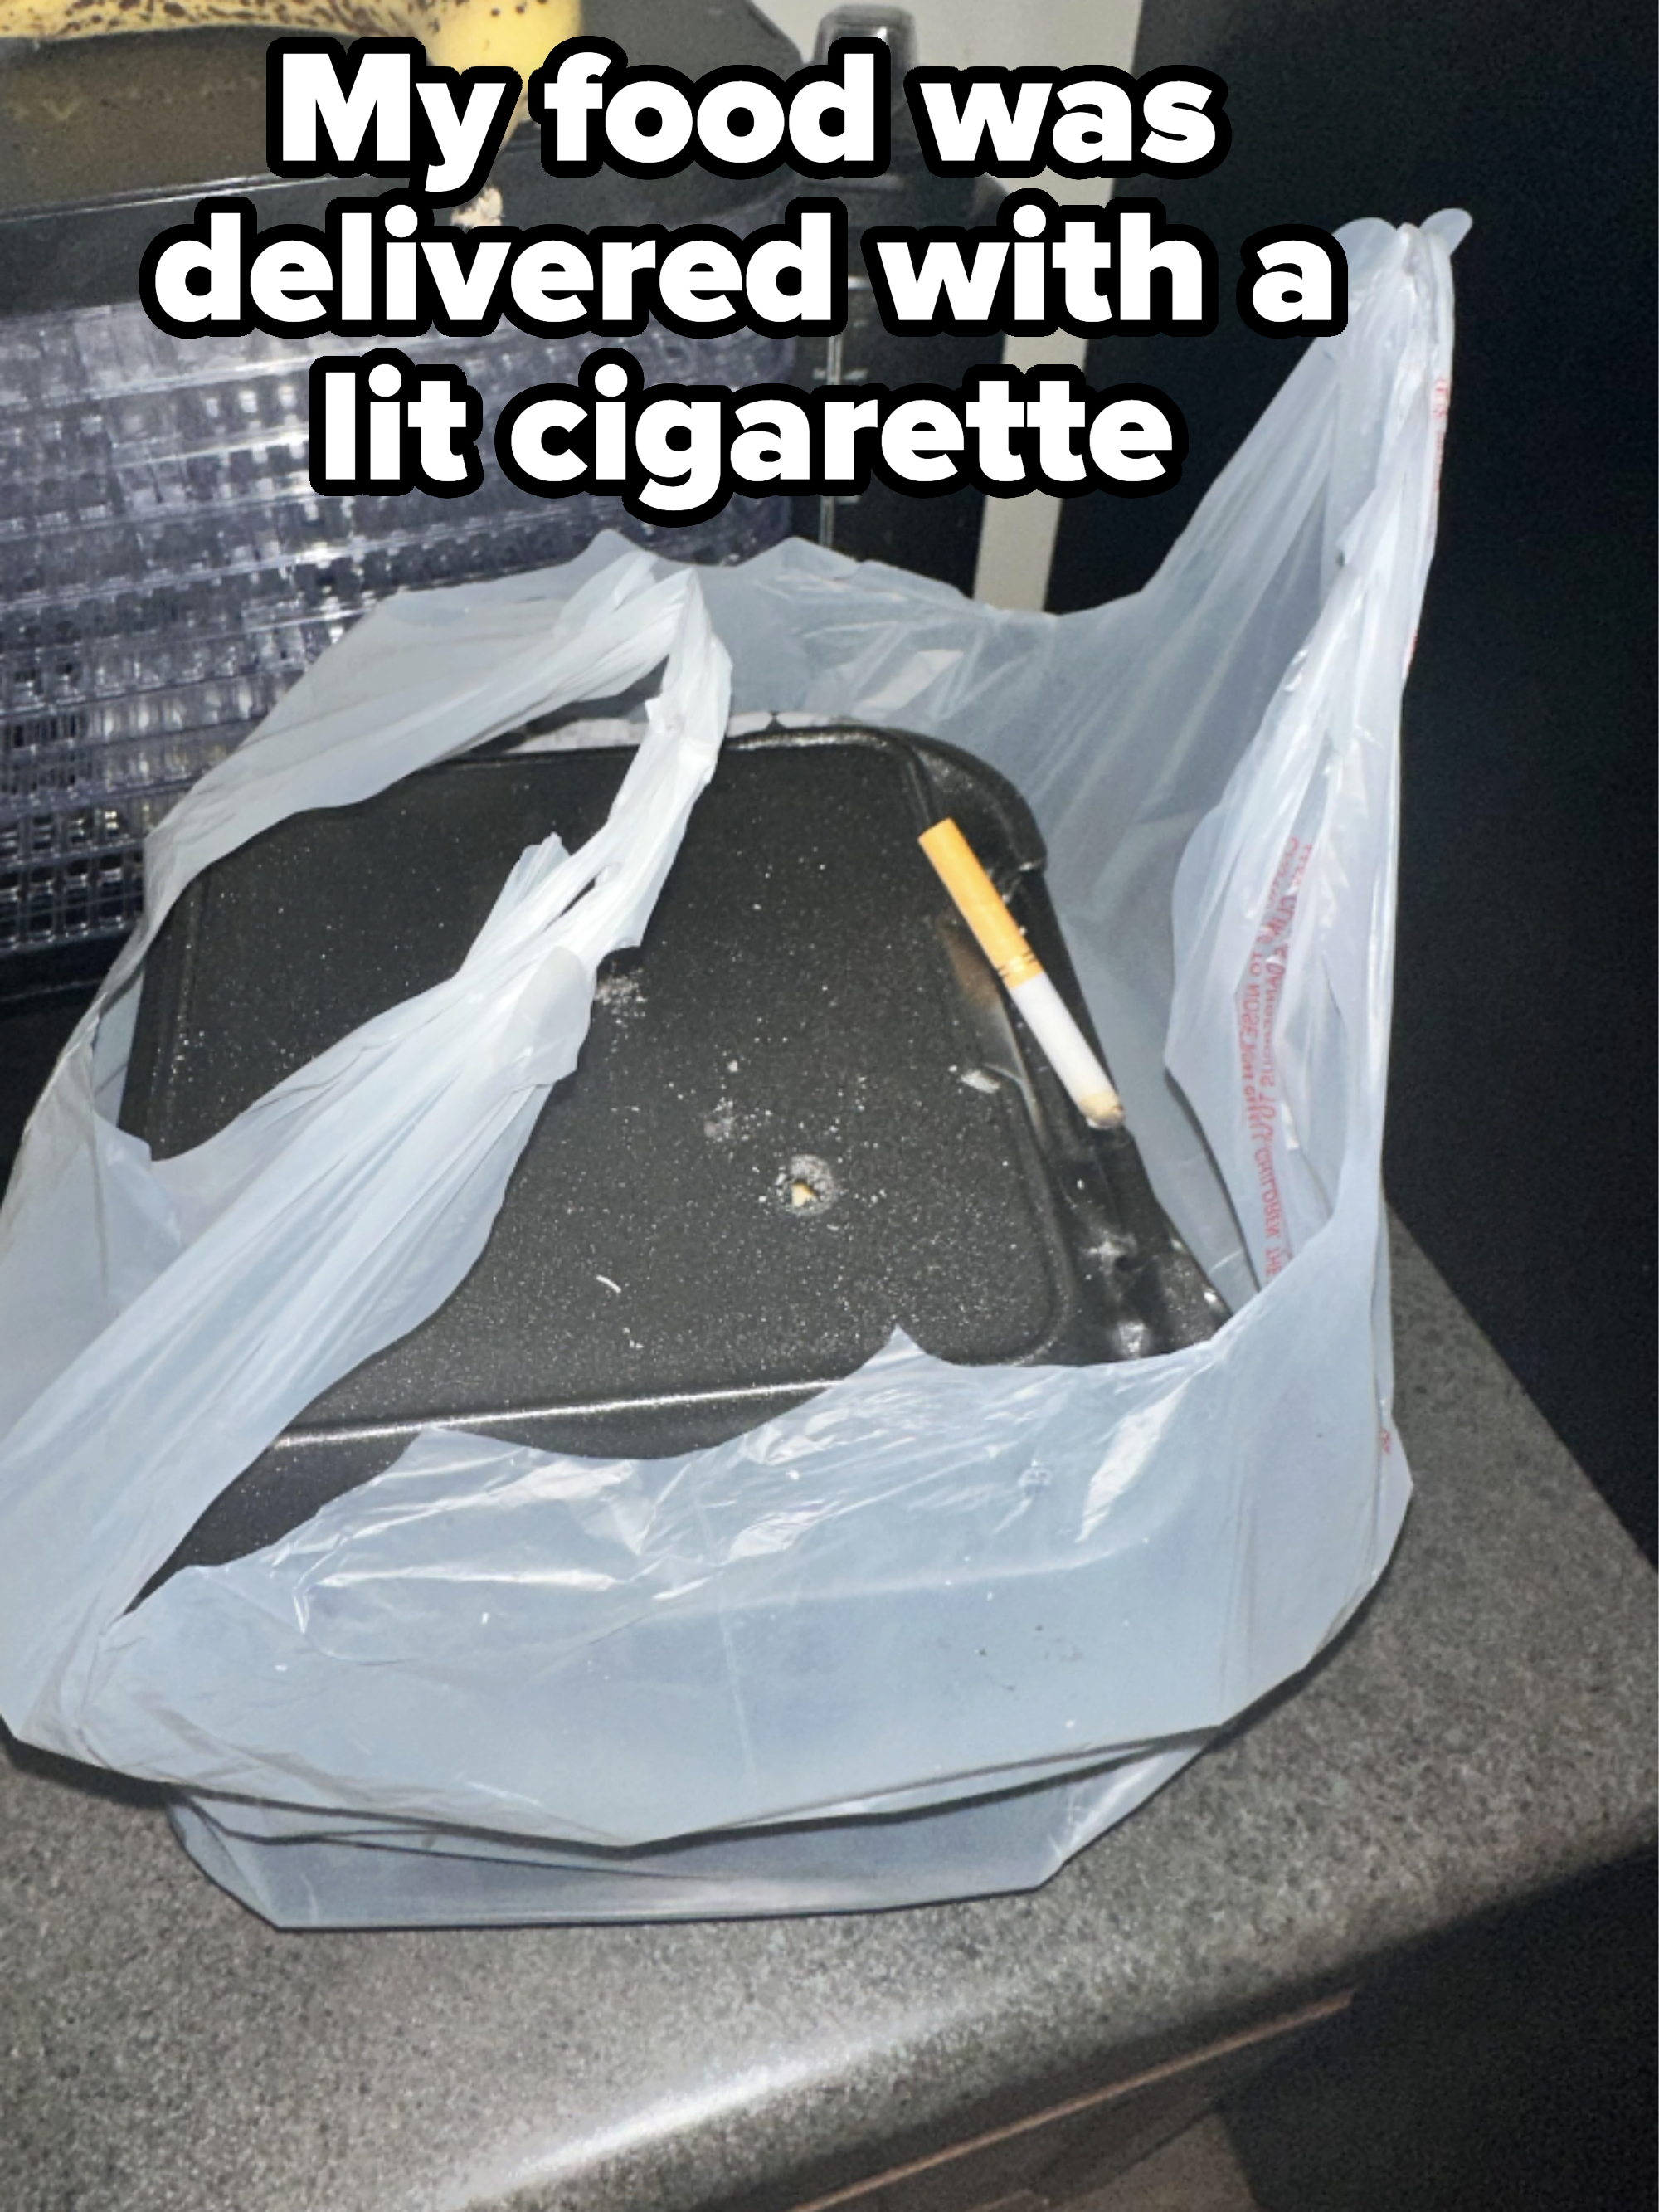 &quot;My food was delivered with a lit cigarette&quot;